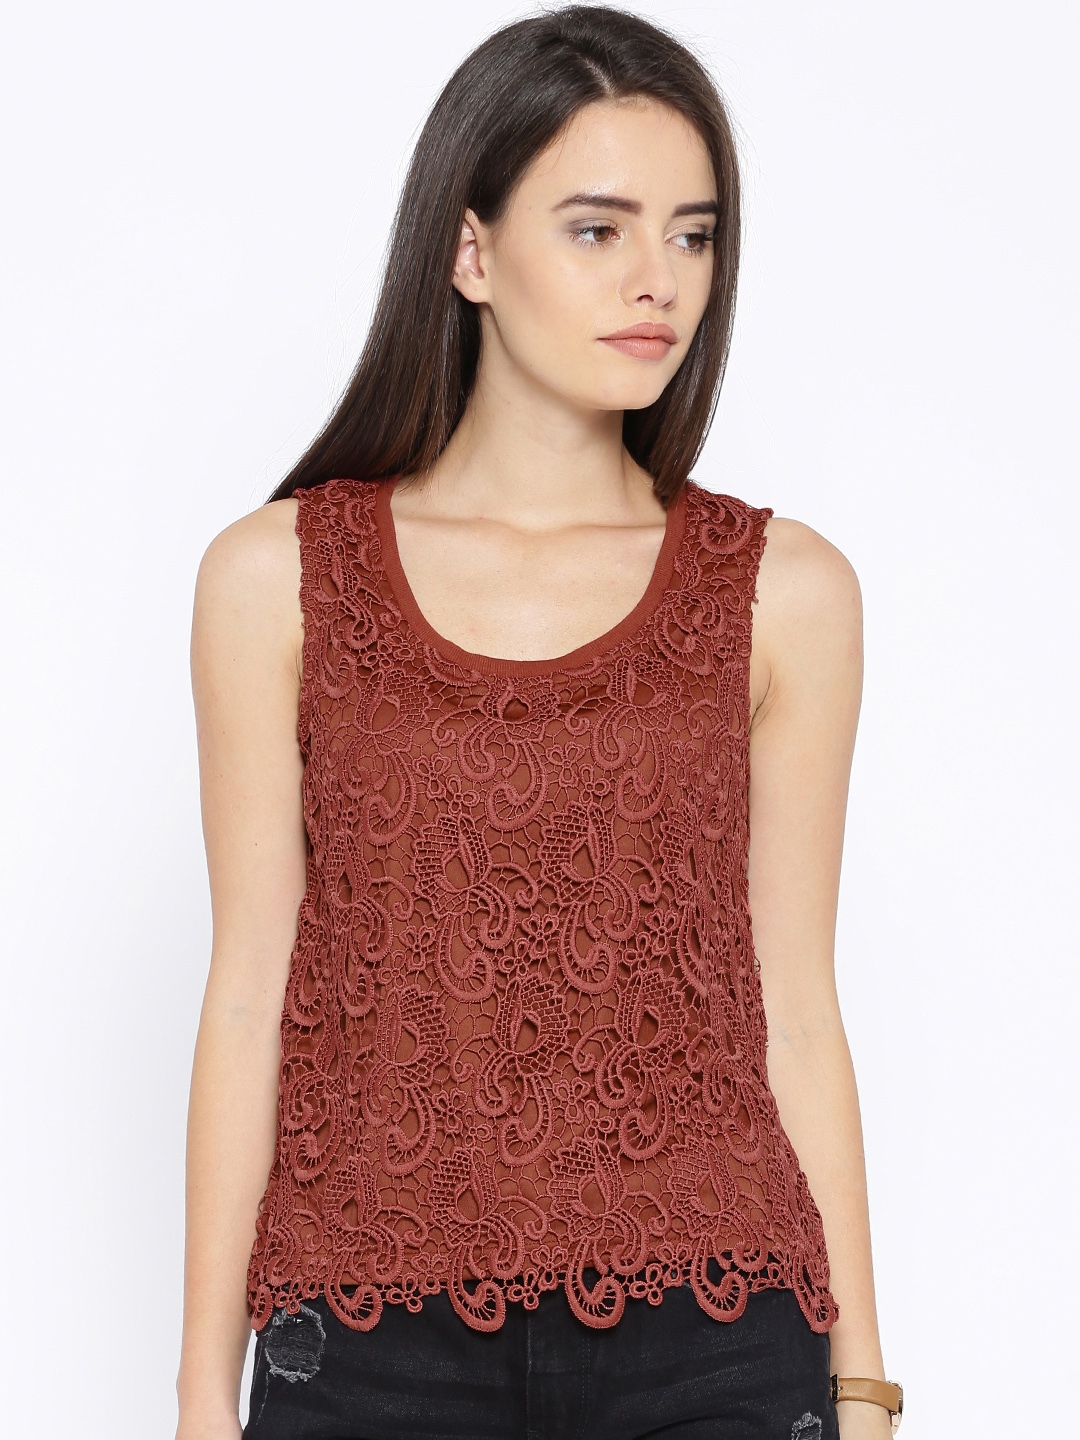 Buy ONLY Rust Red Sleeveless Crochet Top - Tops for Women 1420066 | Myntra